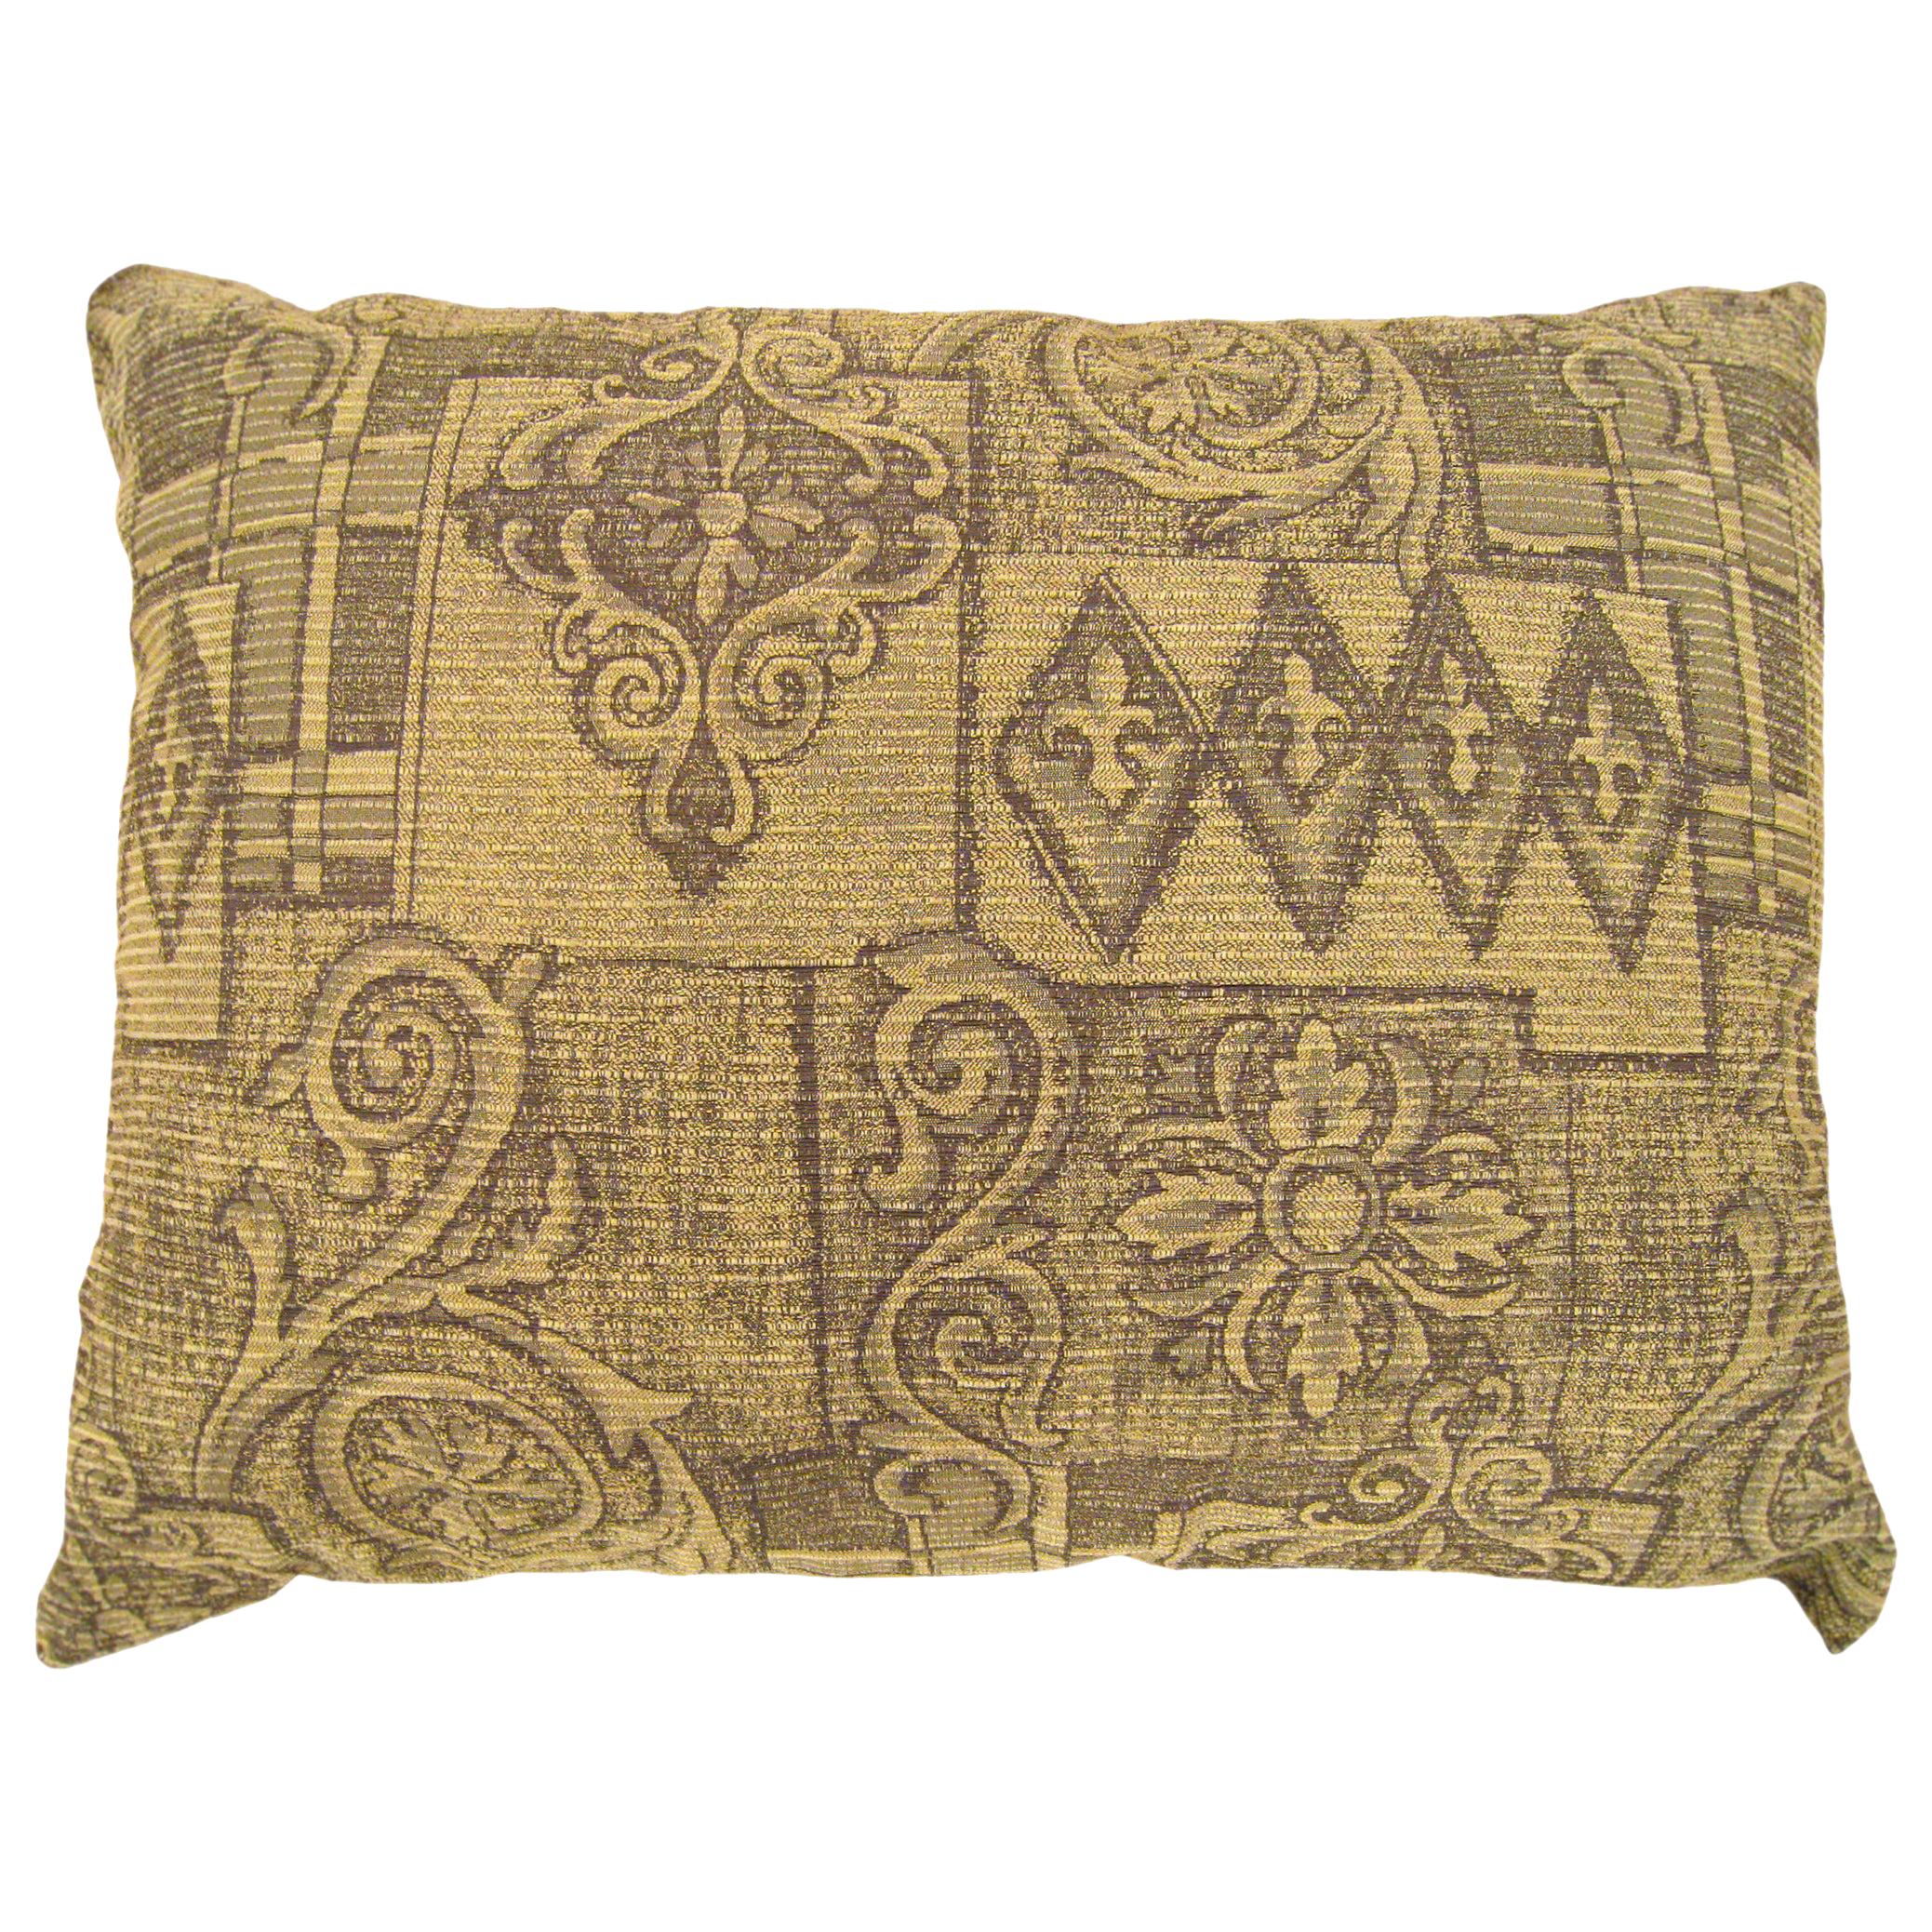 Vintage Decorative Pillow with Floro-Geometric Design on Both Sides For Sale